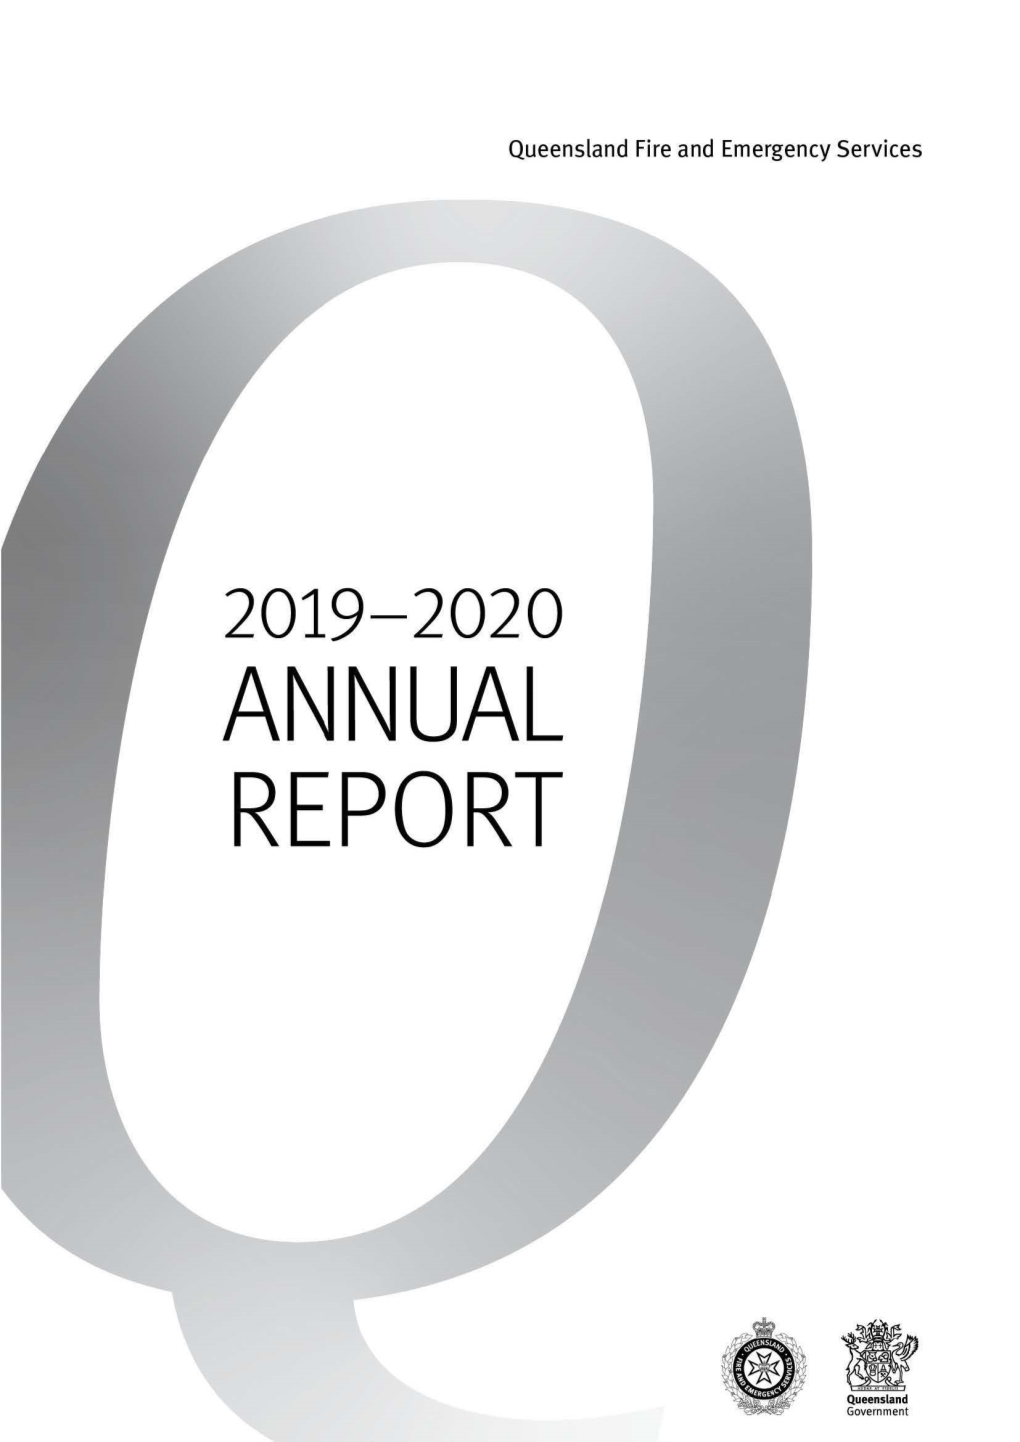 Qfes 2017-18 Annual Report